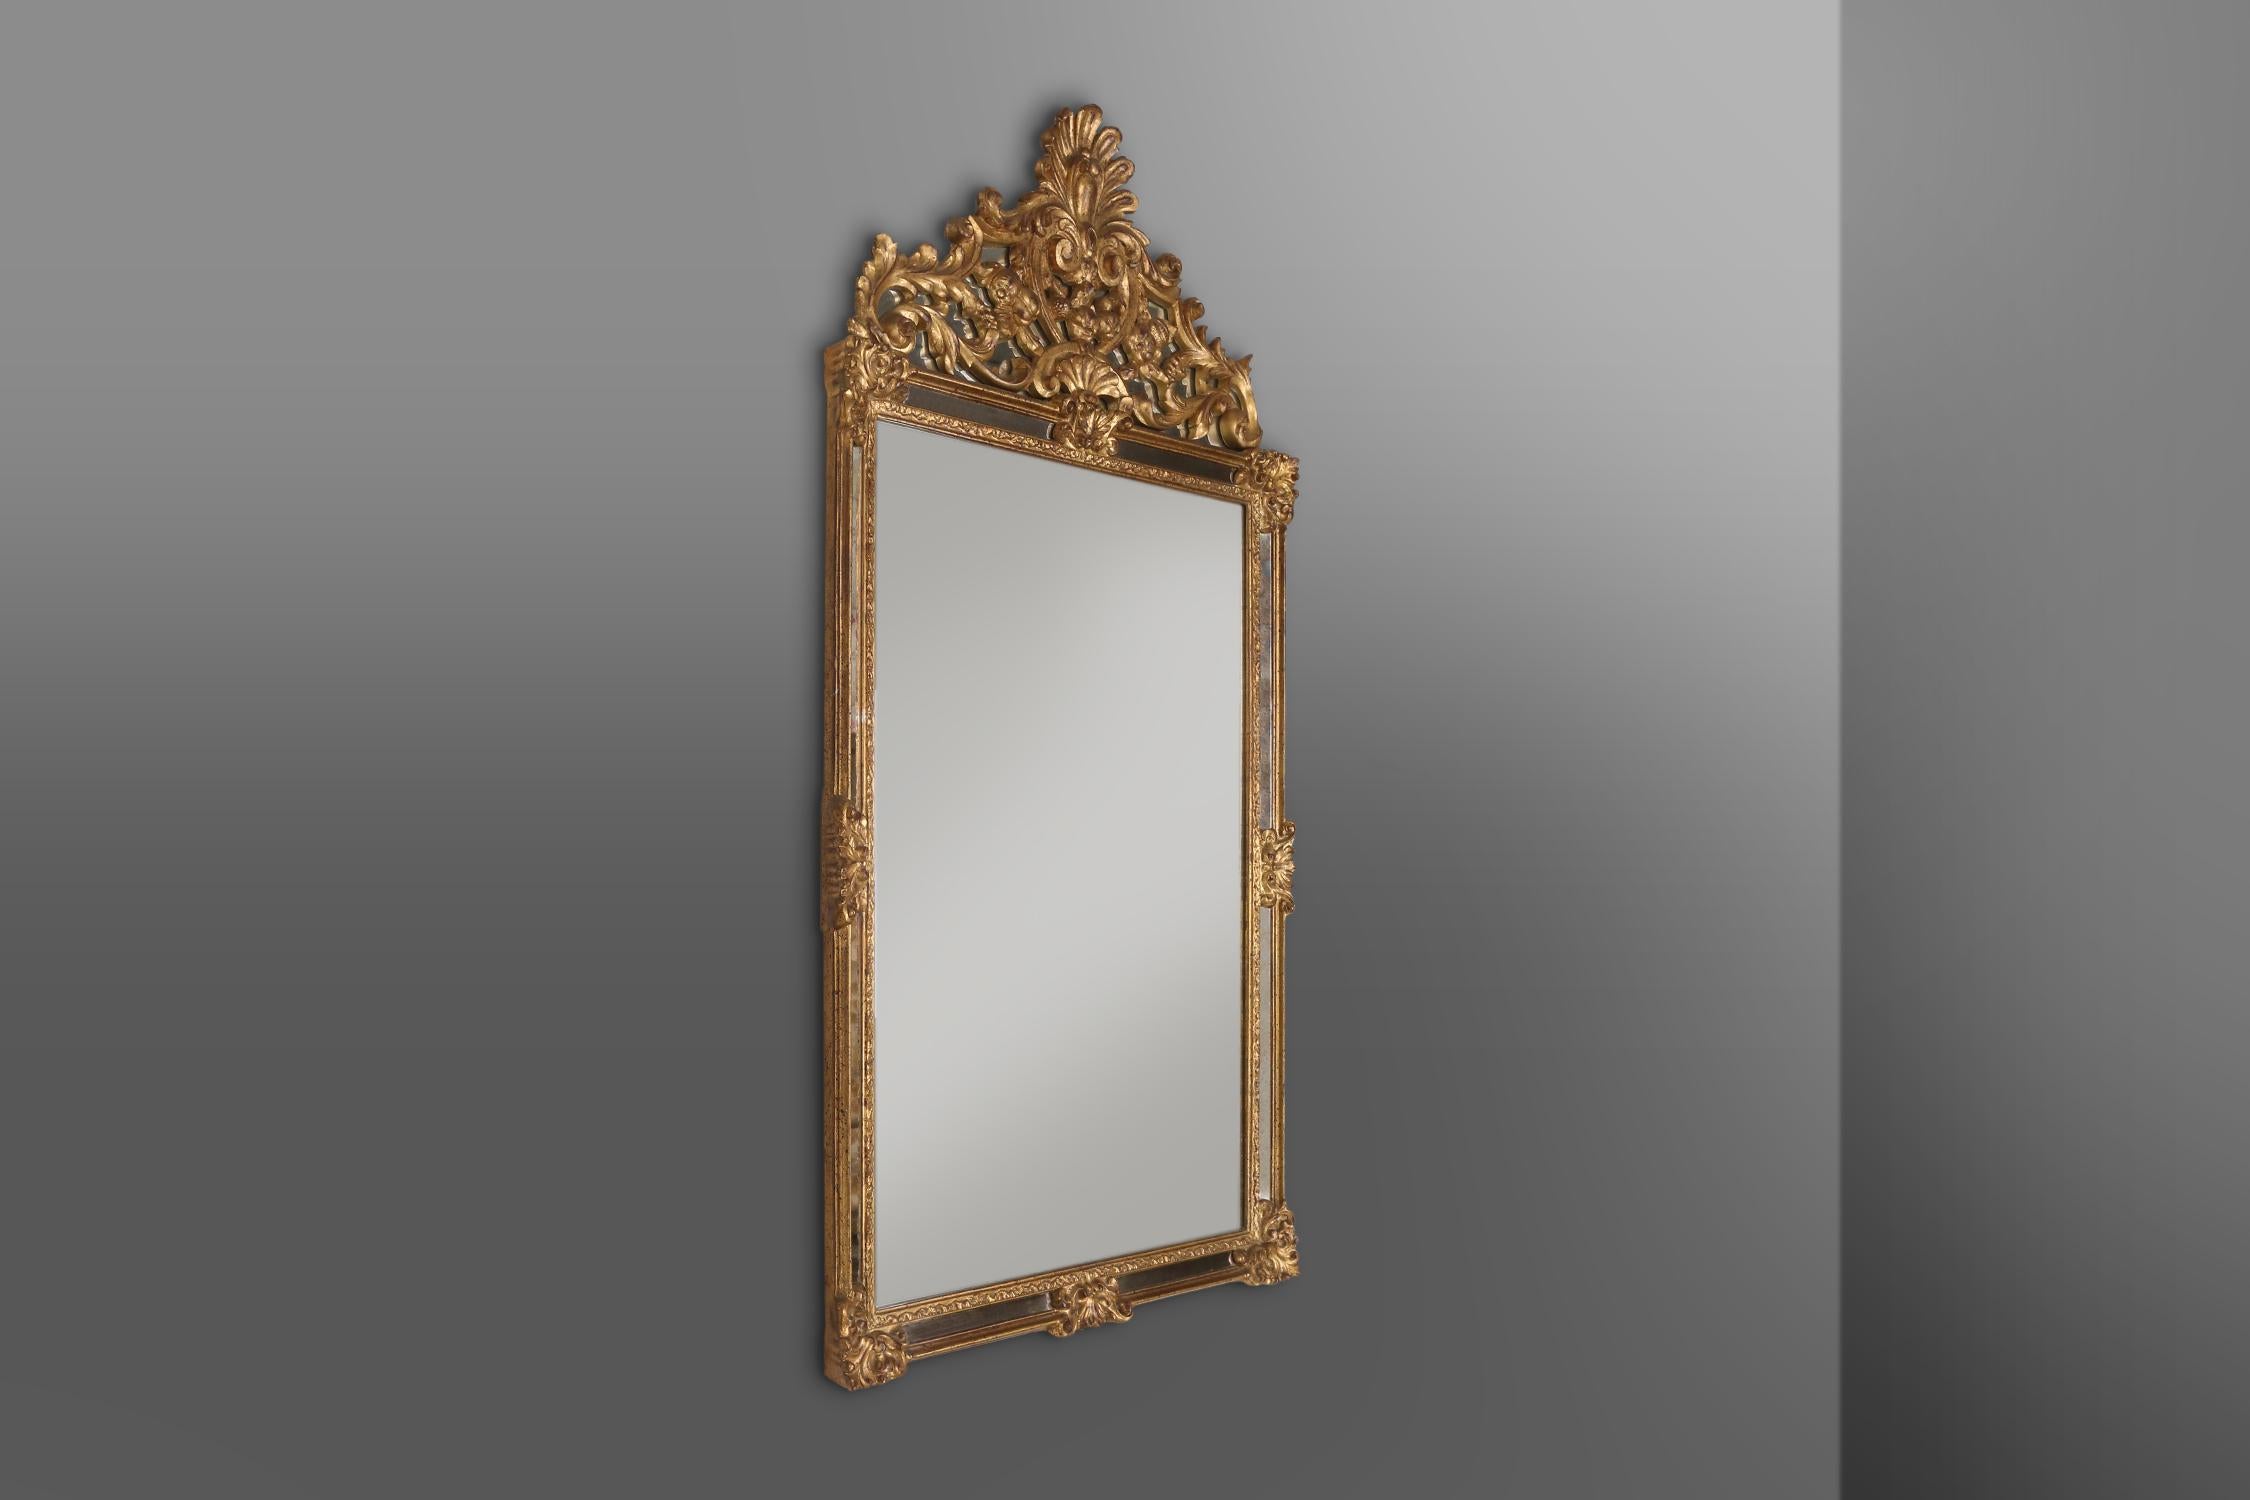 Large gilded mirror with romantic decorations and antique look. Made in Belgium by Deknudt in the seventies. The mirror has a rectangular resin frame with exquisite decorations and a spectacular top. On all sides the frame has smoked mirror glass